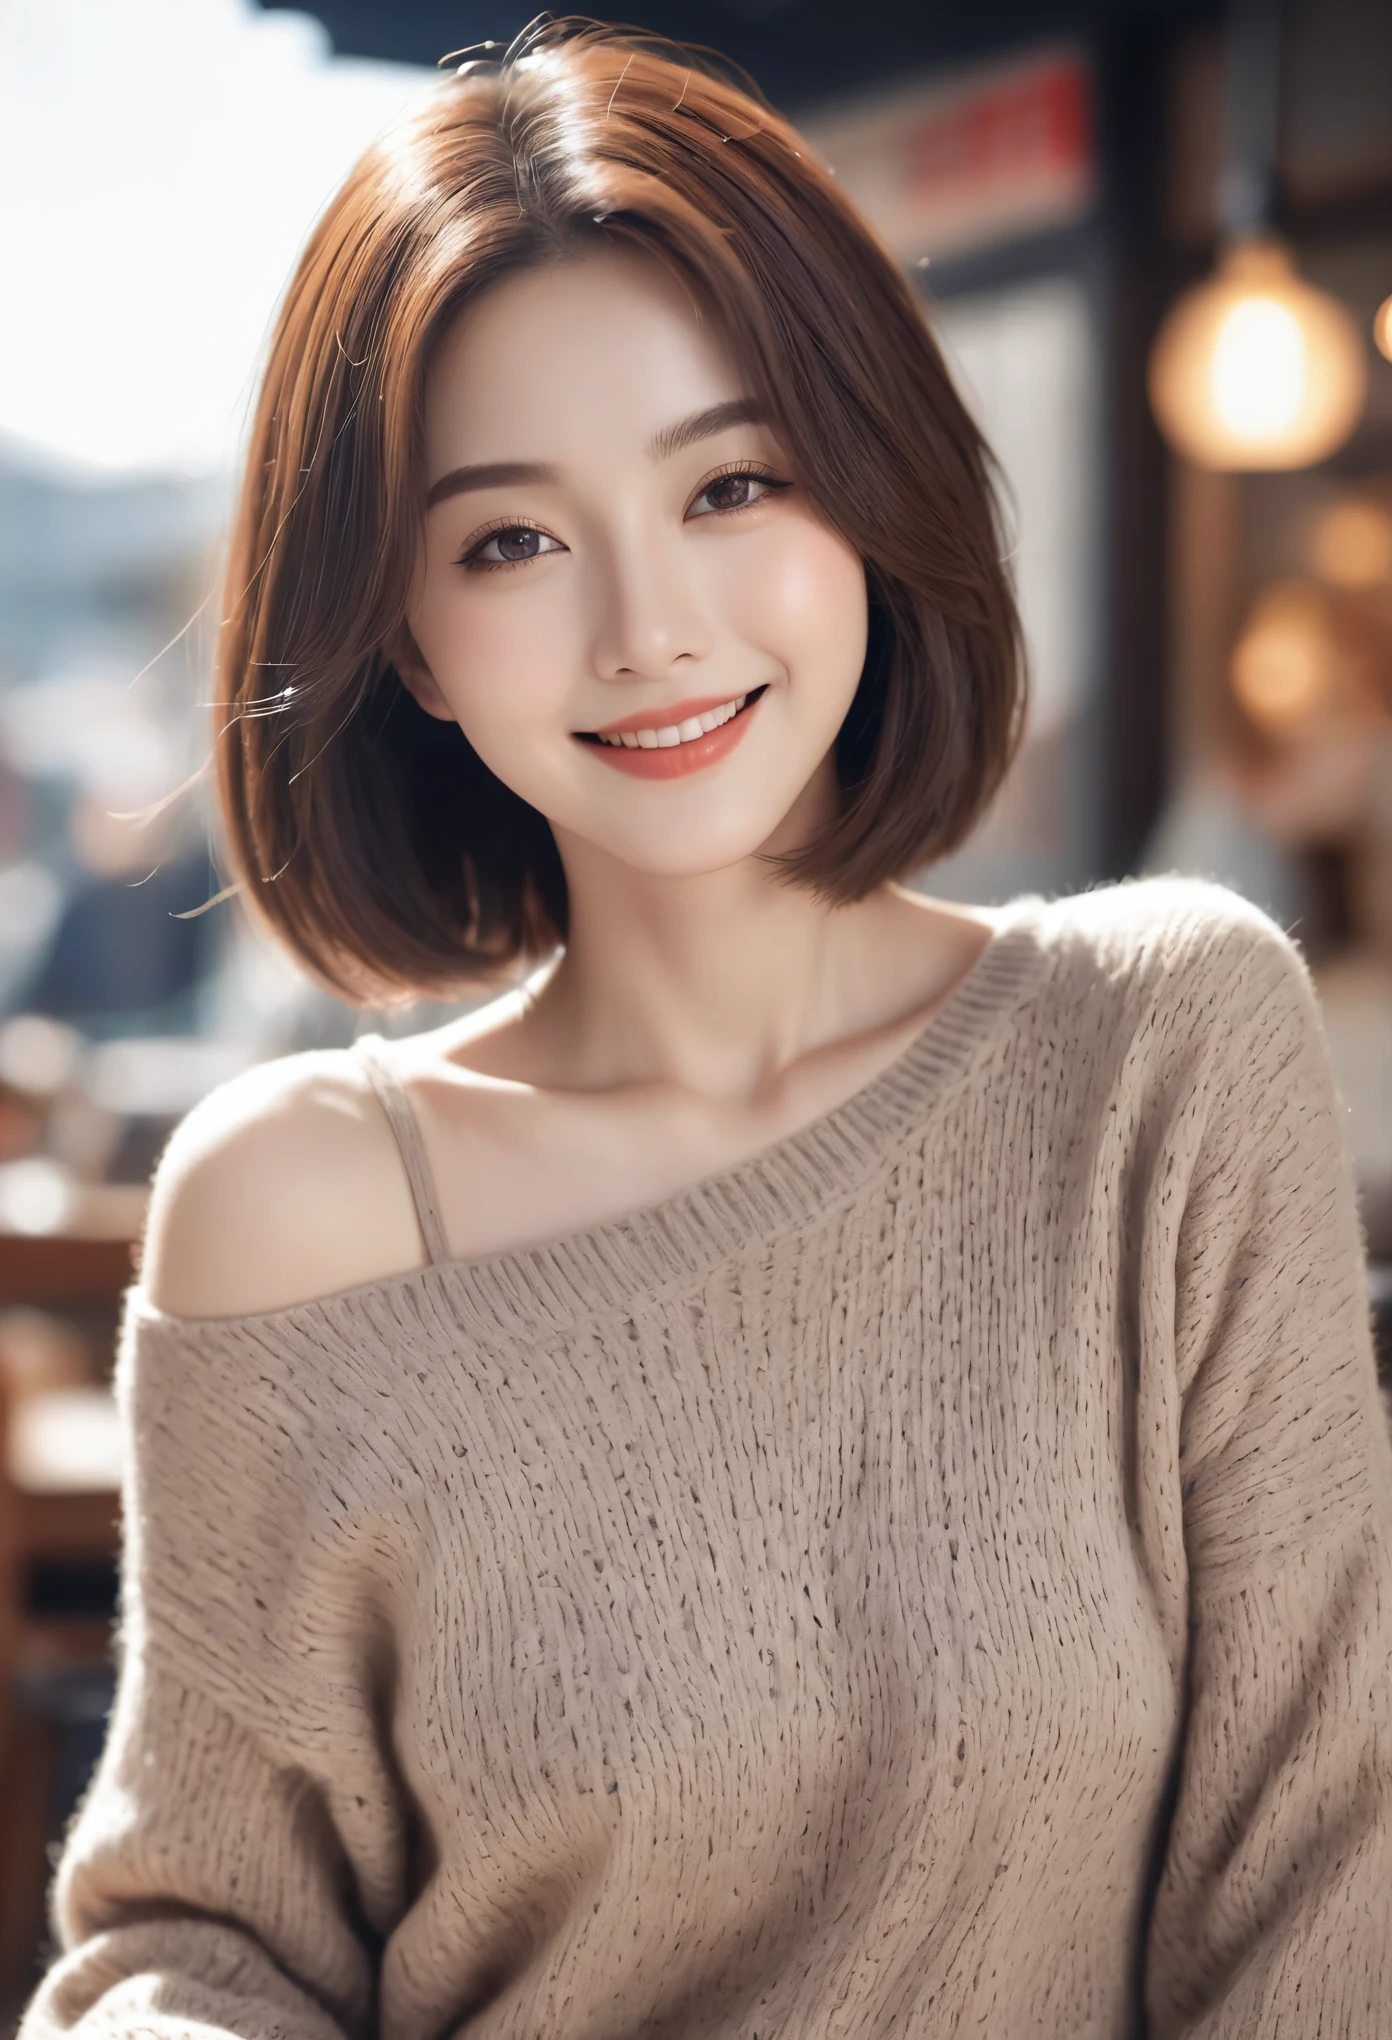 masutepiece, Best Quality, Illustration, Ultra-detailed, finely detail, hight resolution, 8K Wallpaper, Perfect dynamic composition, Beautiful detailed eyes, Long sleeve knit with shoulder extension,Bob Hair, mid-chest, Natural Color Lip, Random and sexy poses,Smile,20 years girl,Colossal ,cafes,Coffee,Emphasis on the chest